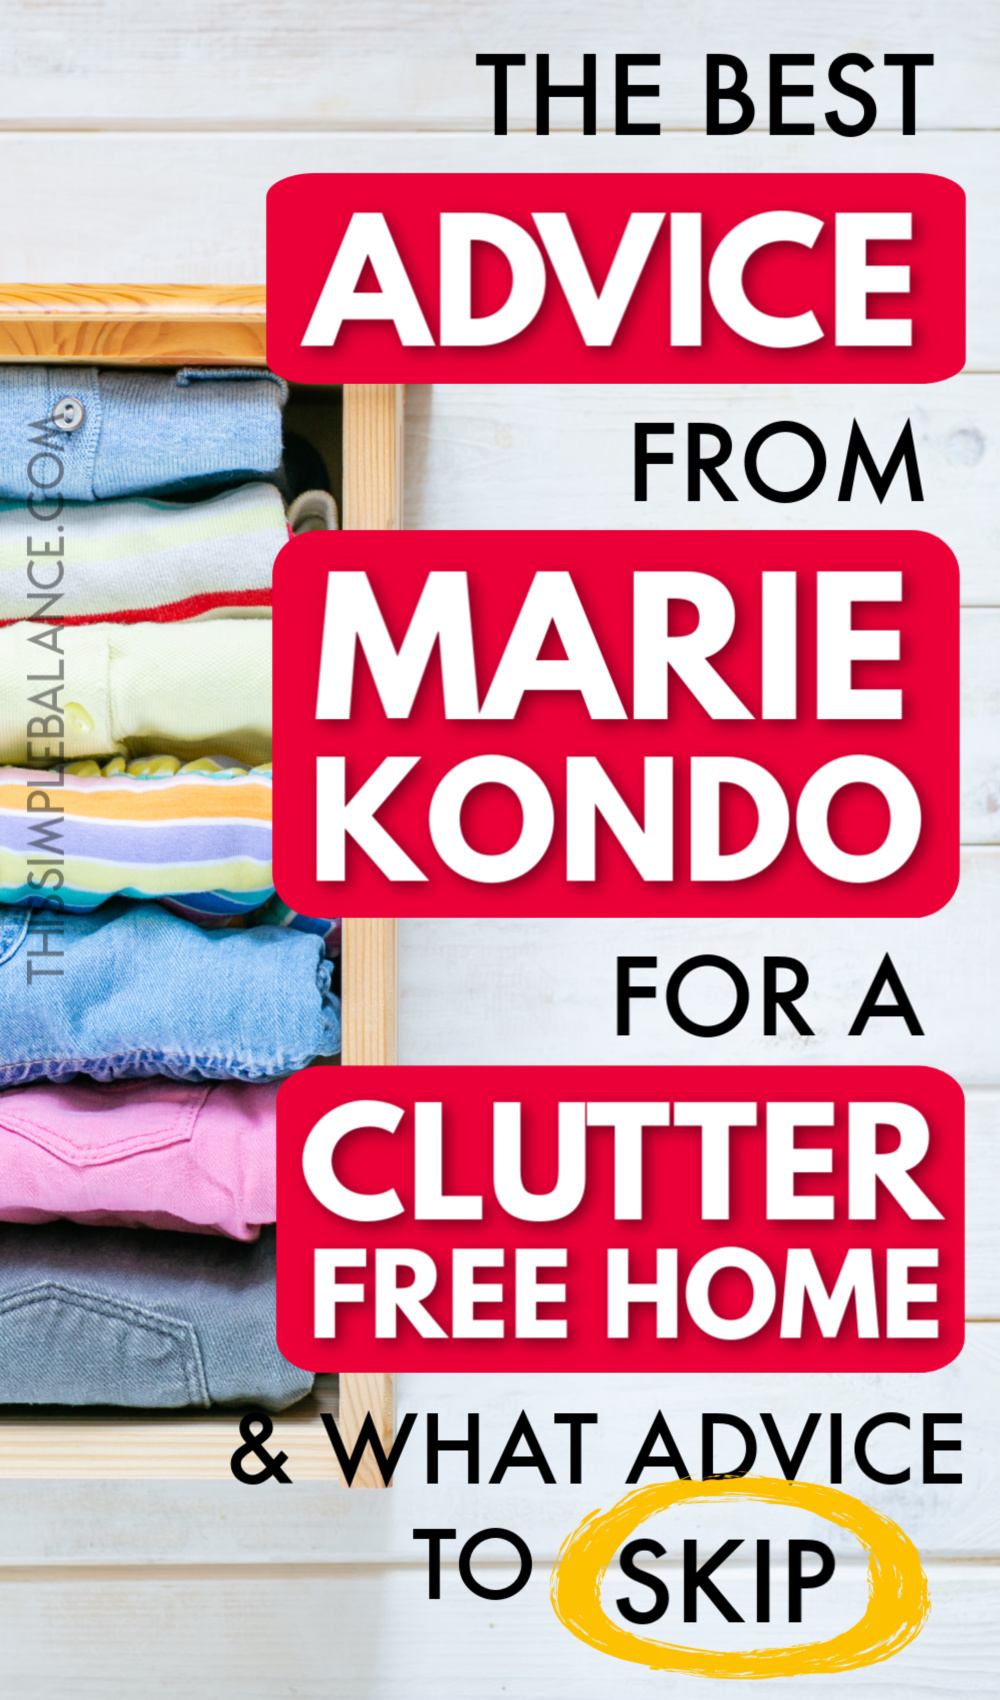 drawer full of clothes folded the KonMari way, with text overlay, "the best advice from marie kondo for a clutter free home & what advice to skip"